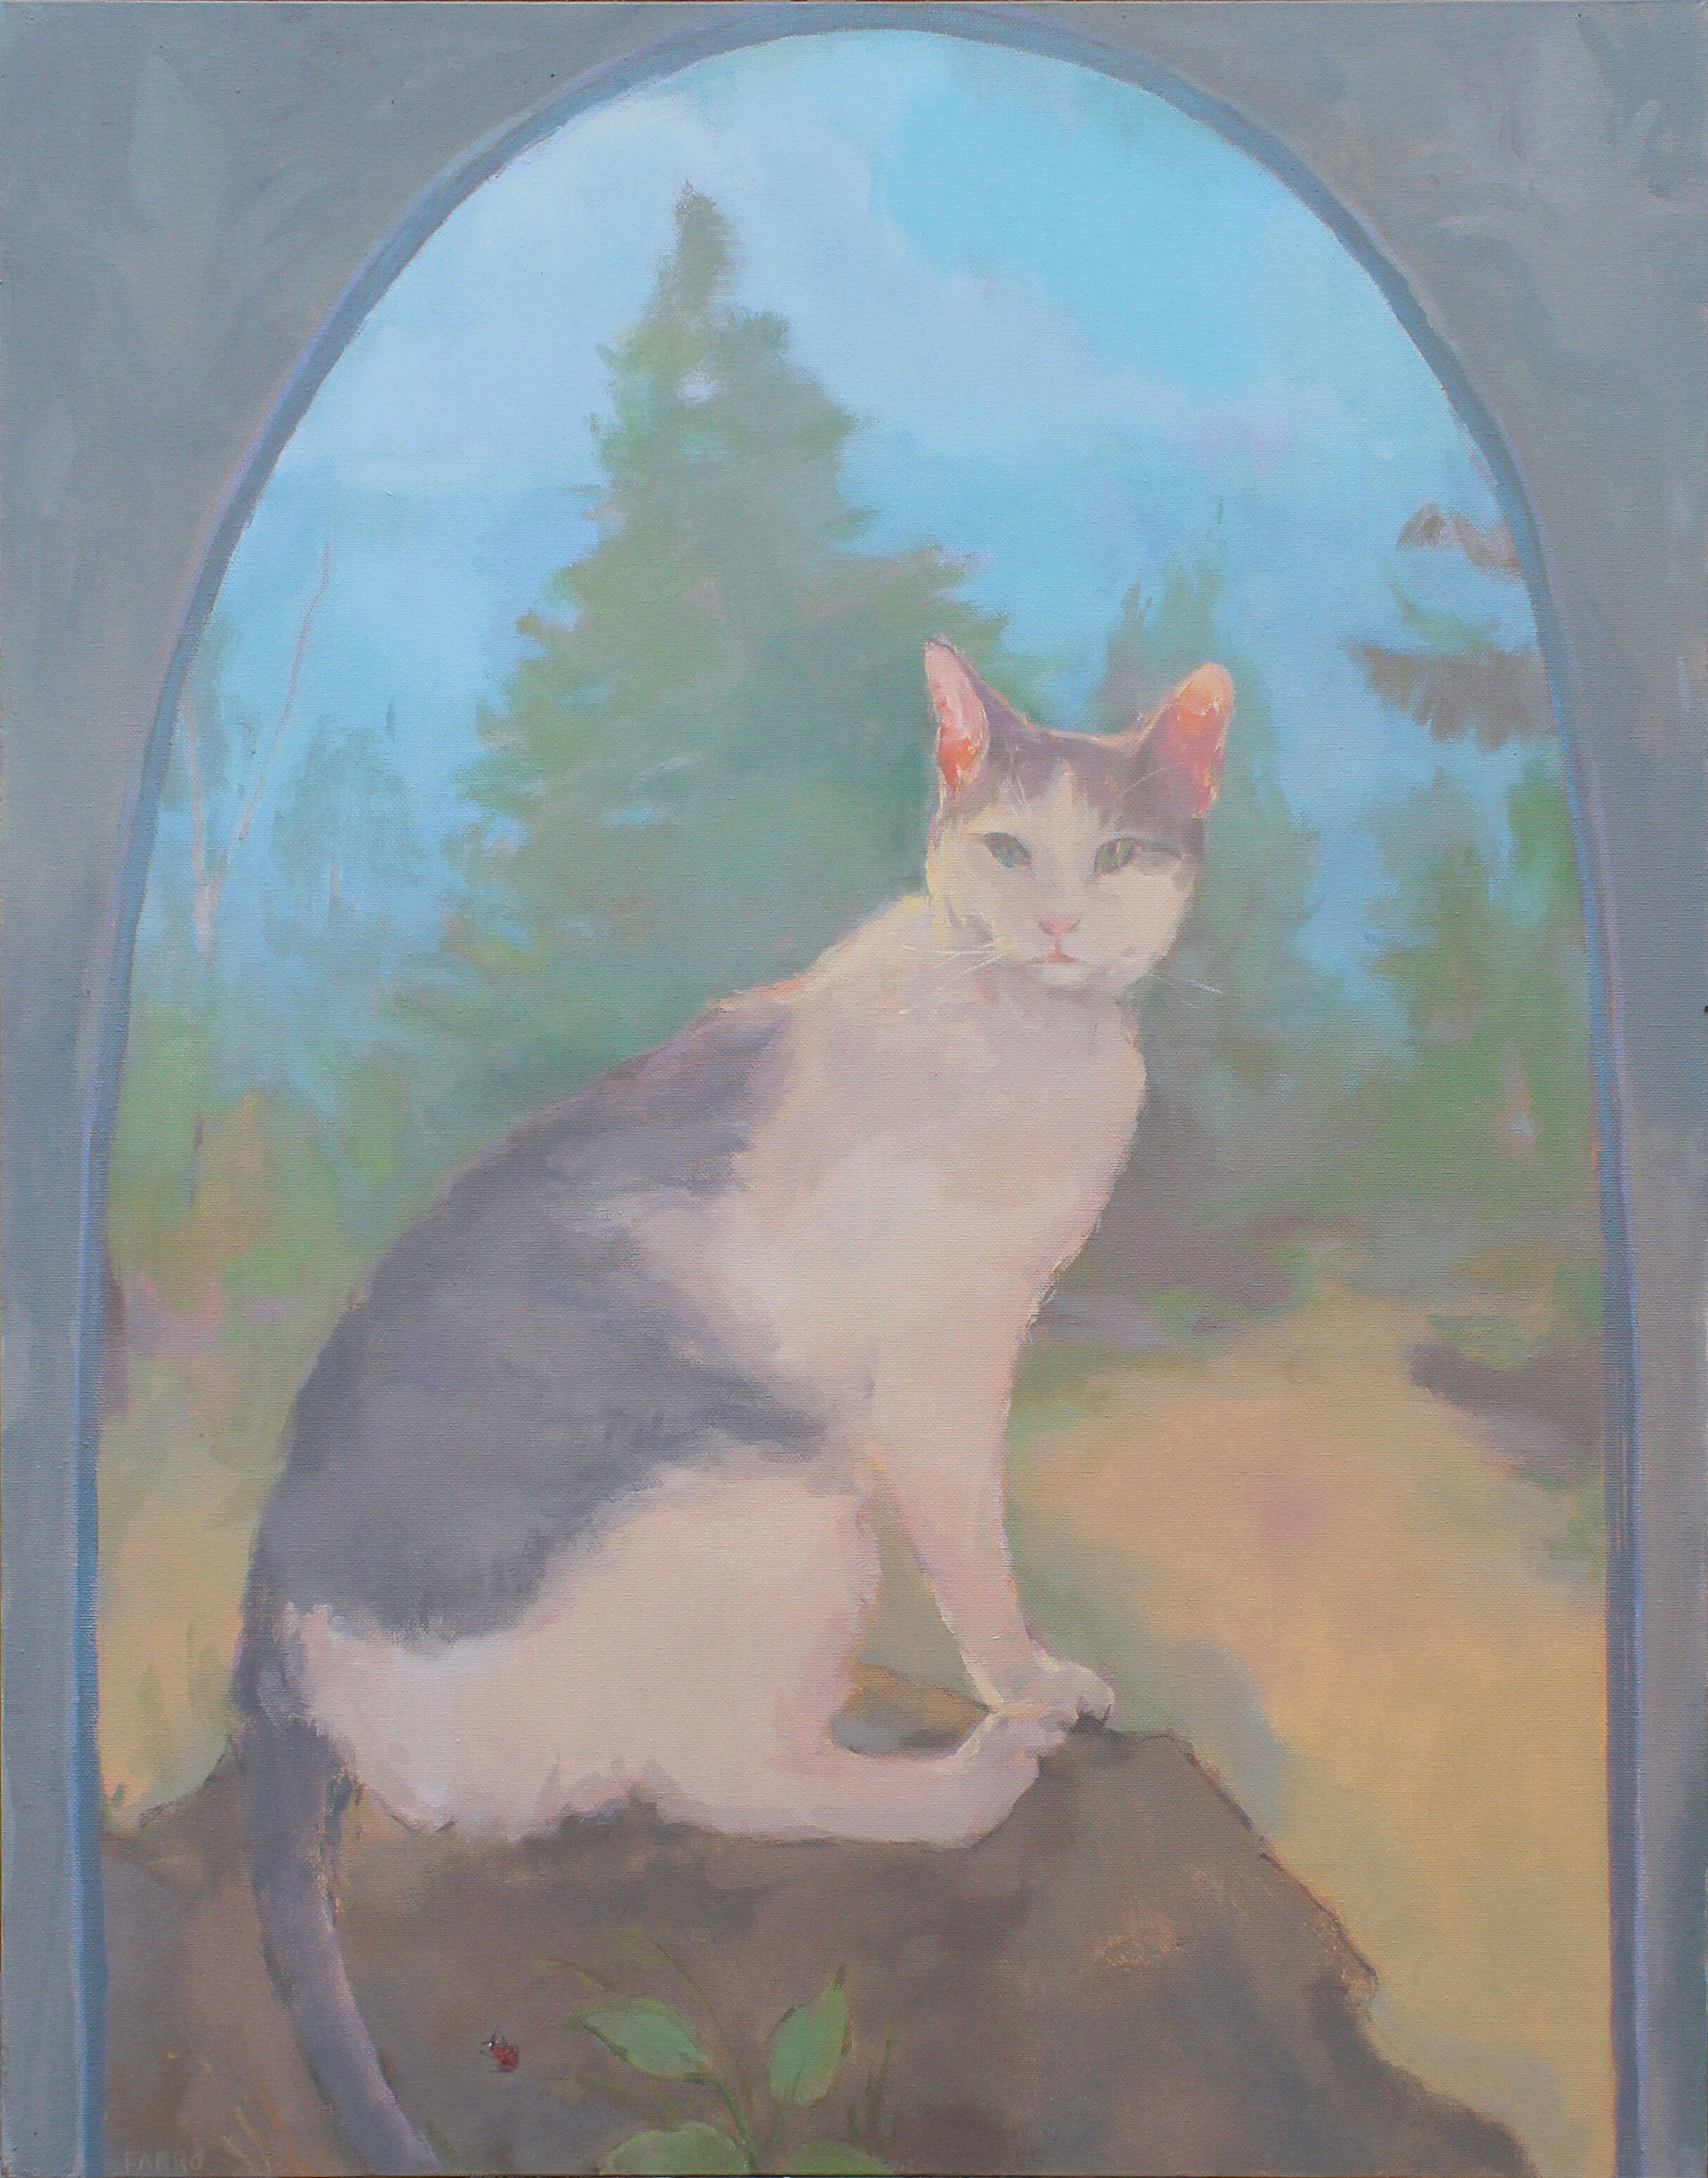    Cat with Pines, Rock, and Ladybug   oil on canvas 28 x 22” 2020  collection of the artist 